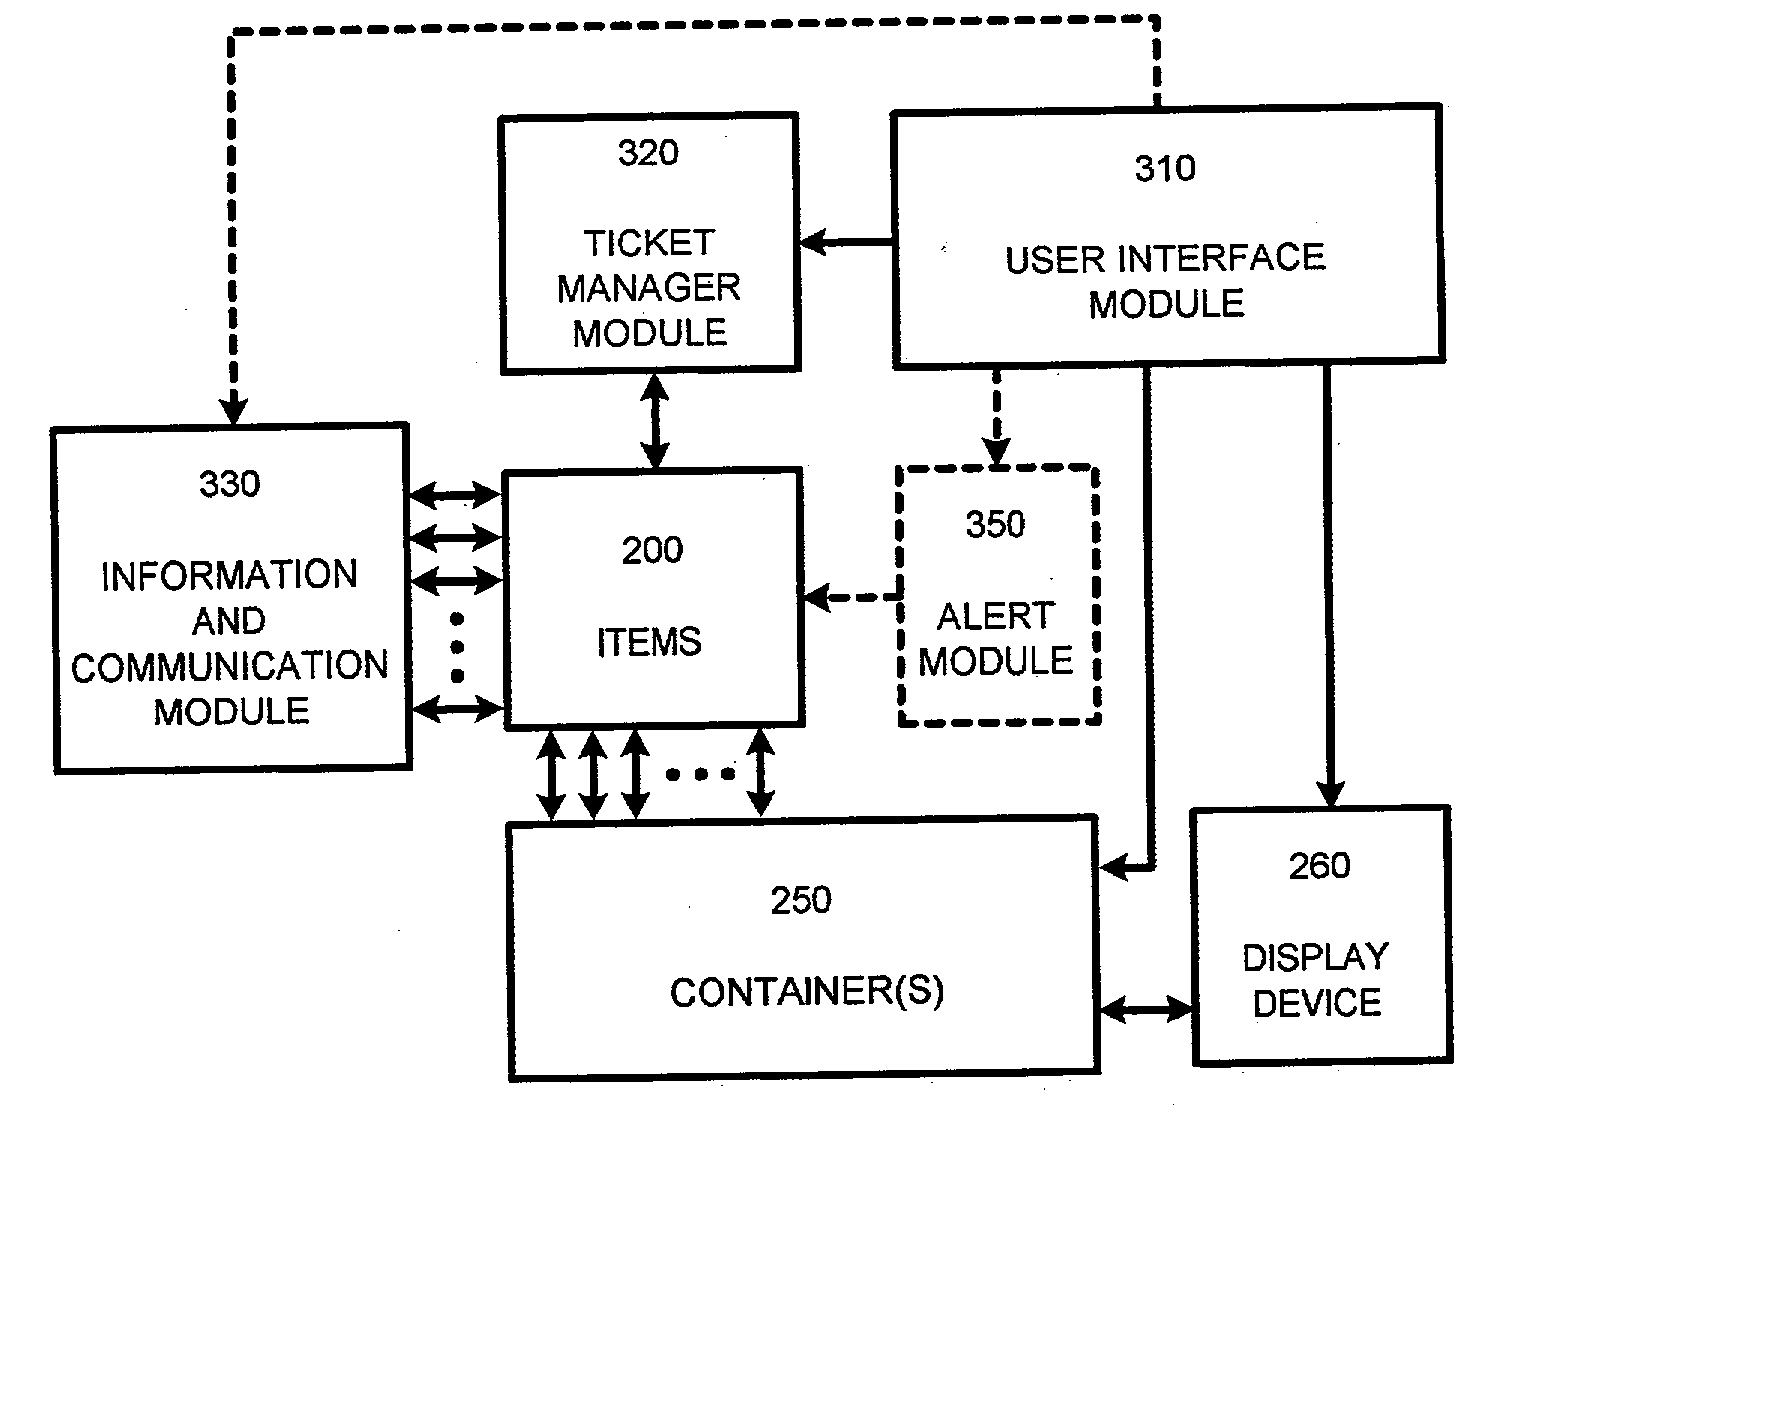 System and process for providing dynamic communication access and information awareness in an interactive peripheral display